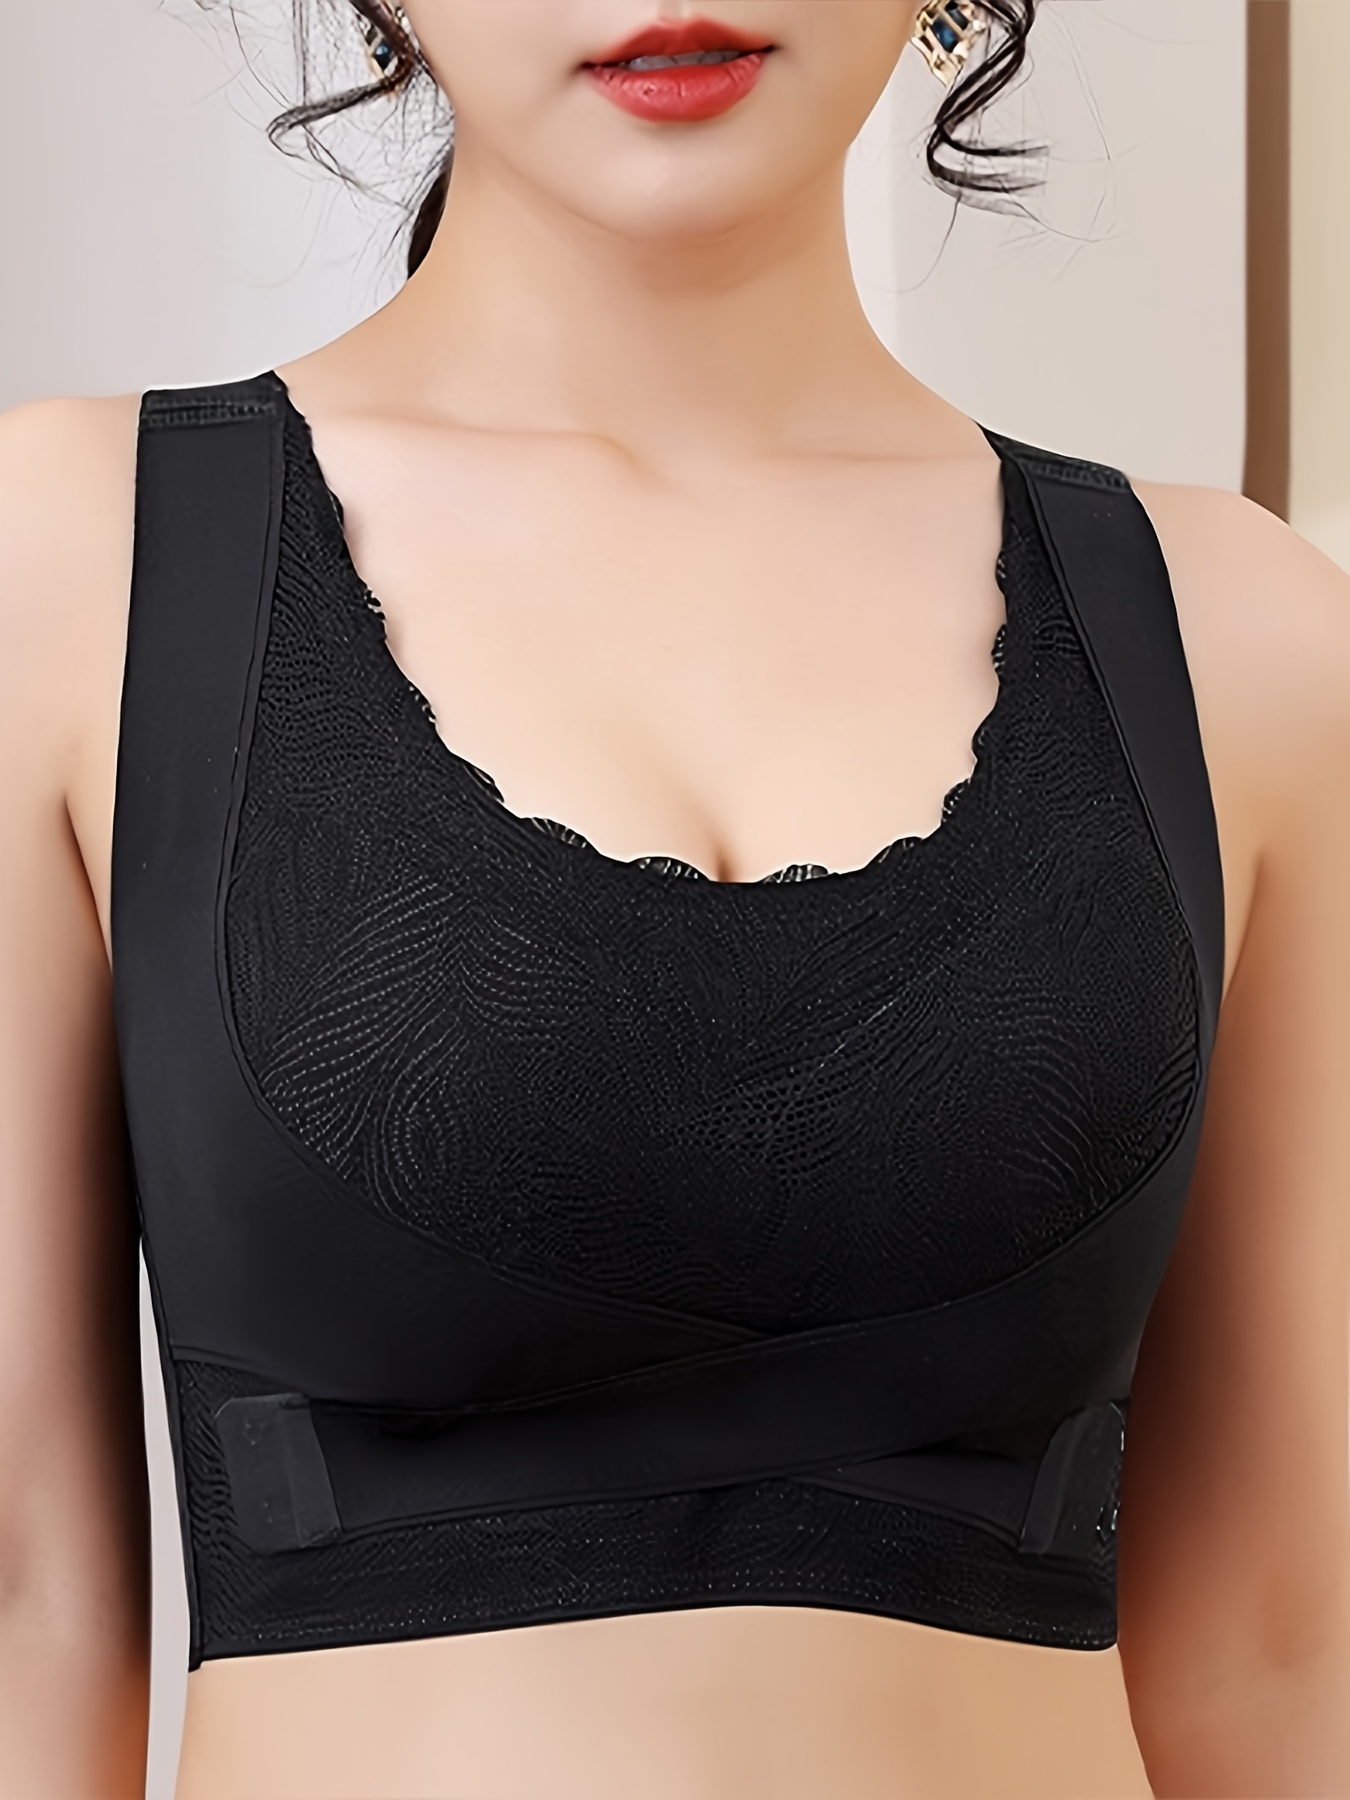 Women's Lace Wireless Bra, Full Coverage Front Crossover Push Up